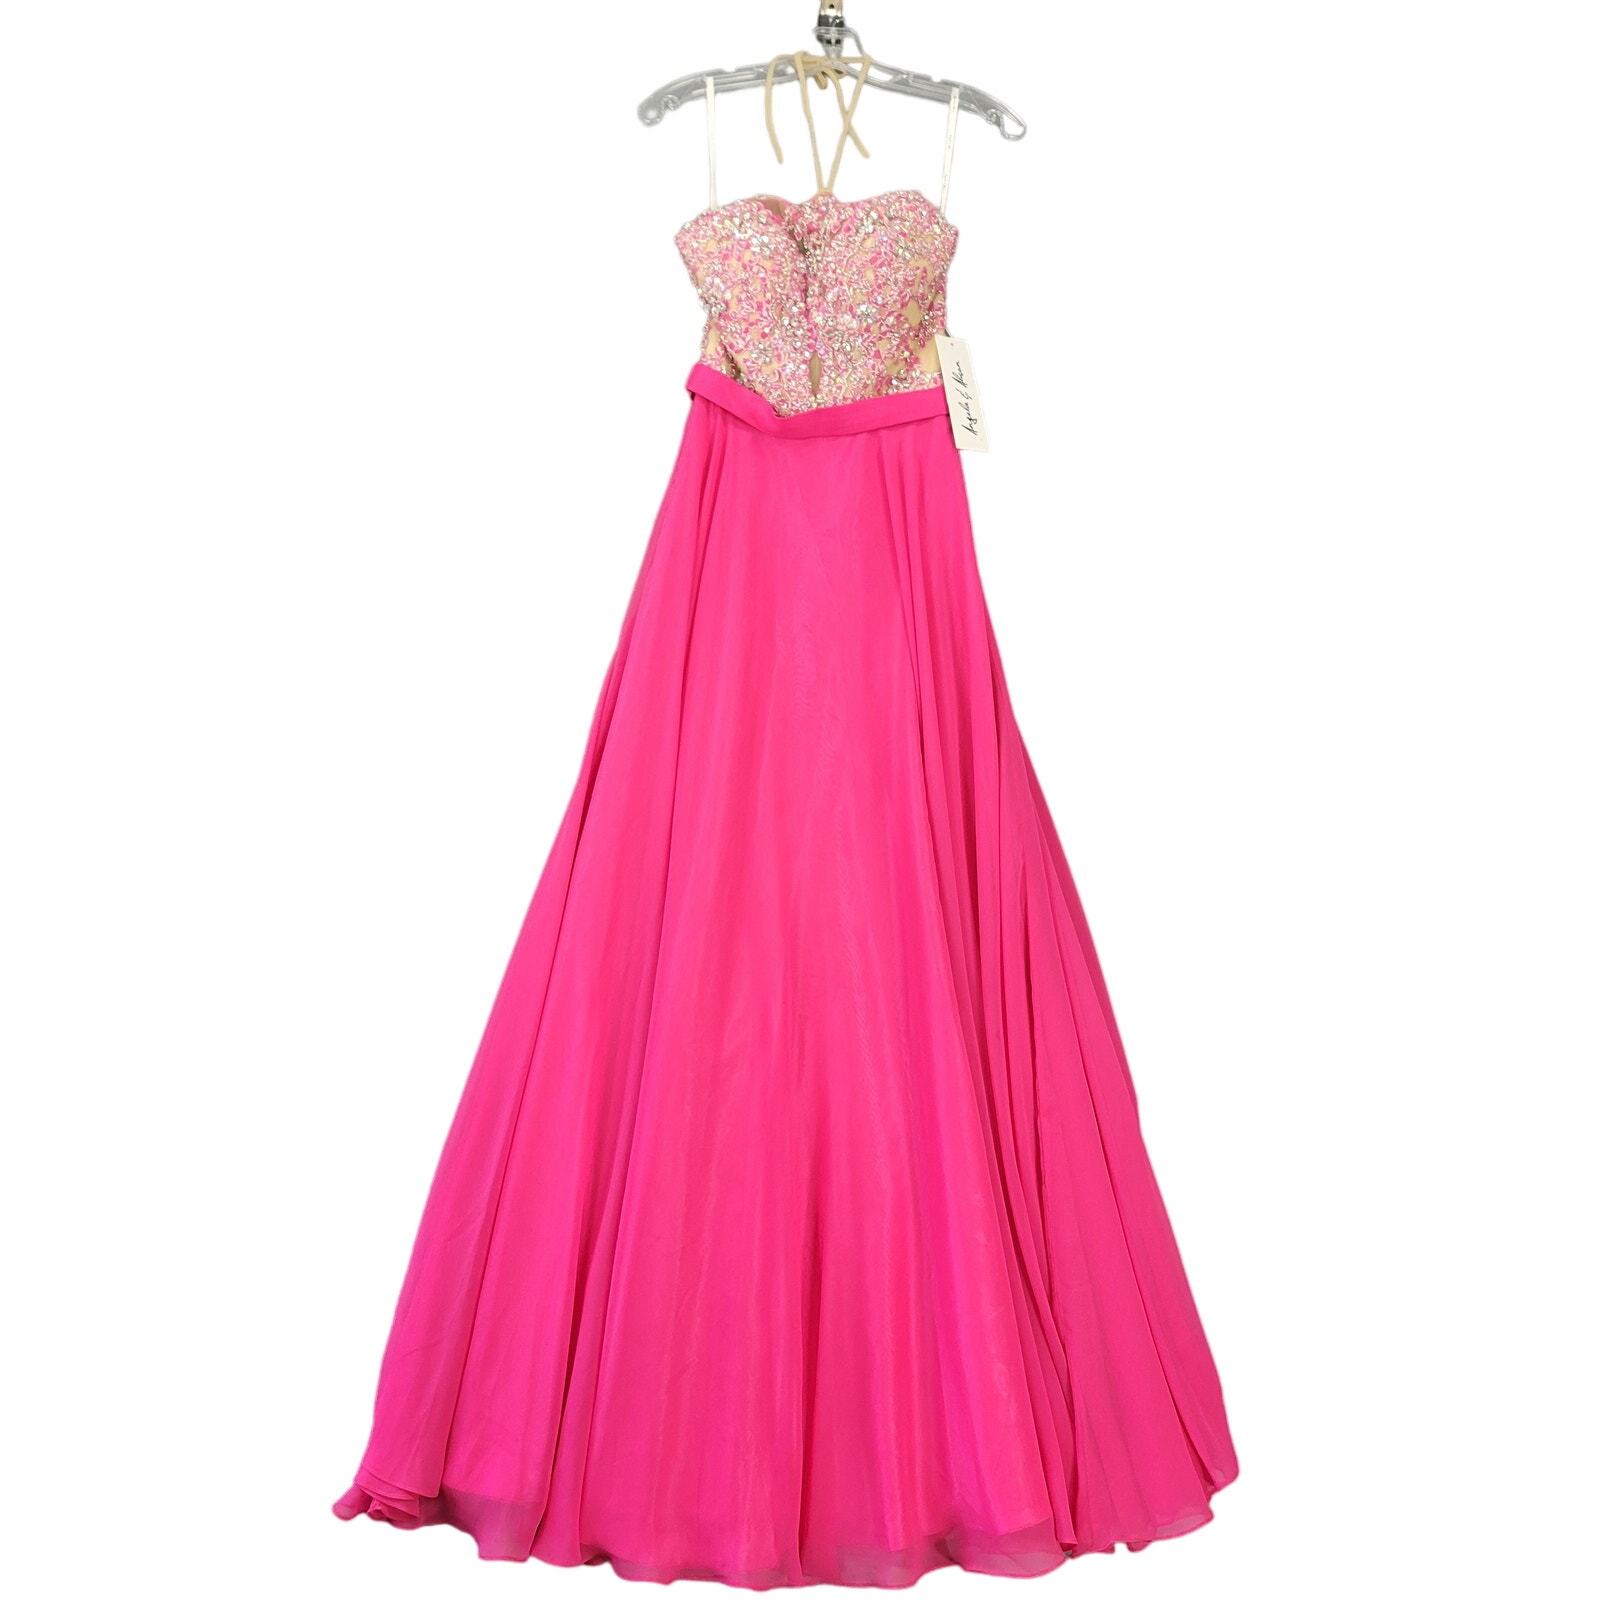 Primary image for Angela Alison Women Dress Size 0 Juniors Pink Maxi Beads Lace Formal Sleeveless